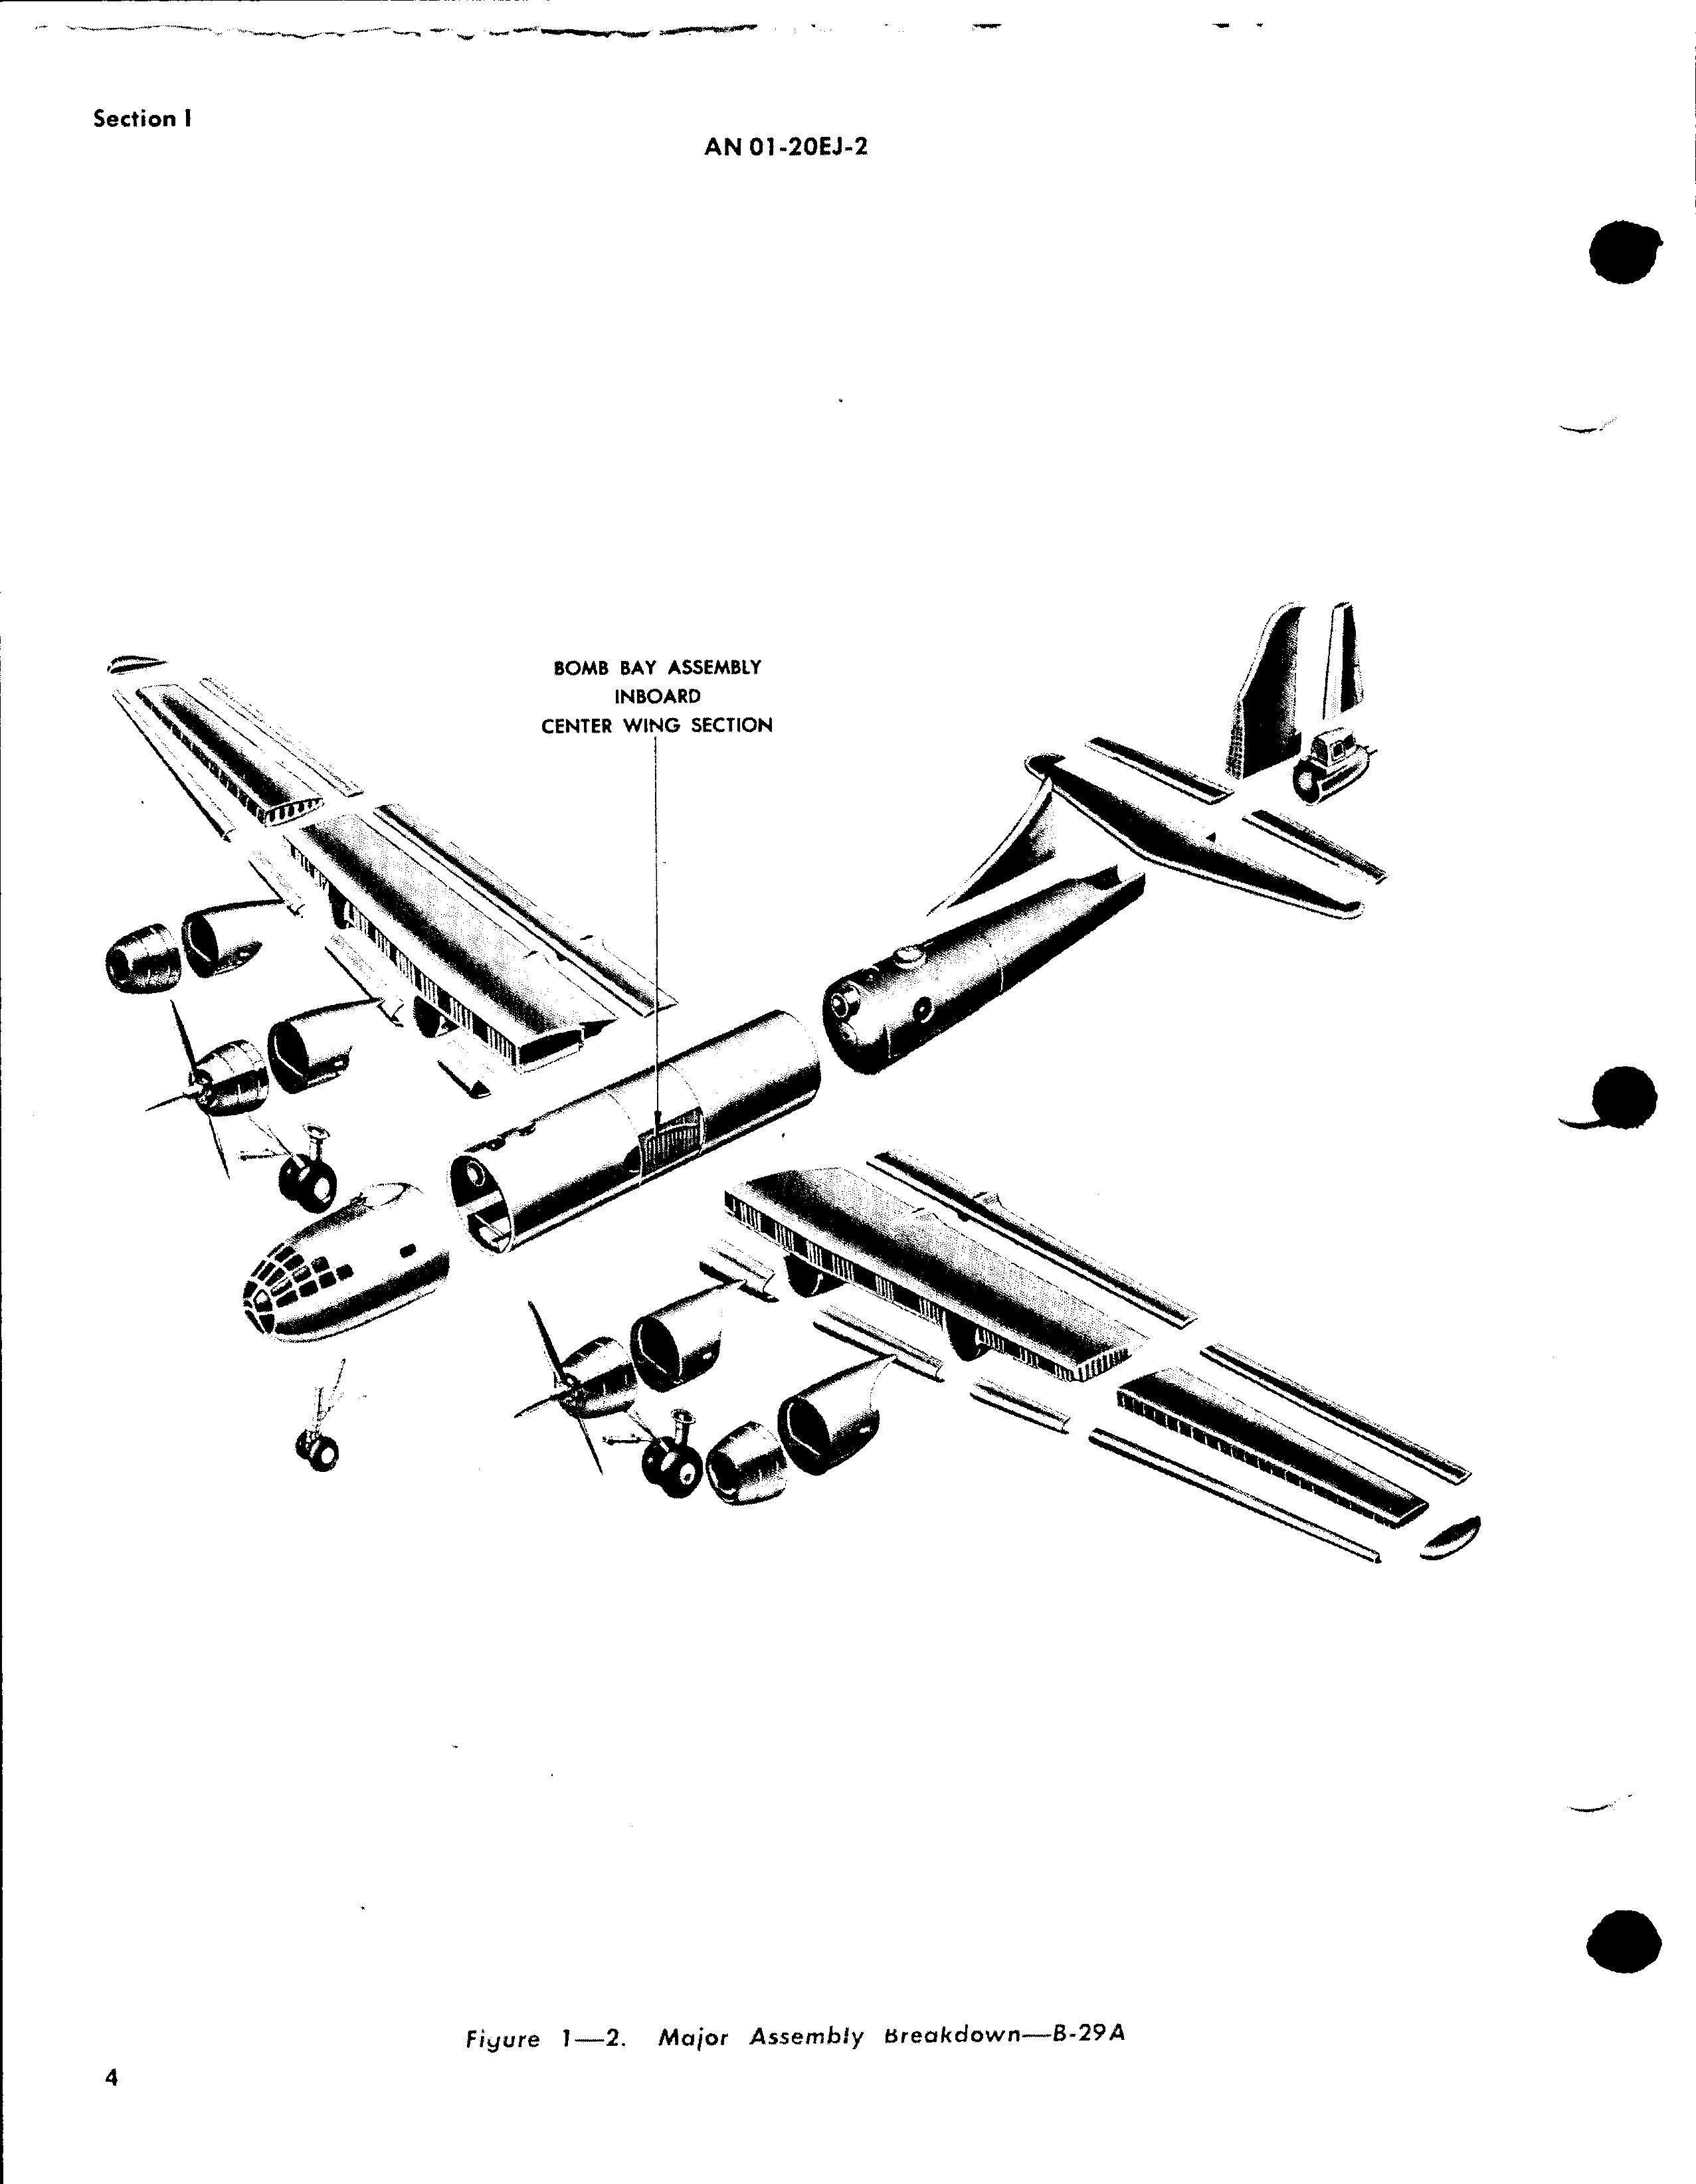 Sample page 8 from AirCorps Library document: Erection and Maintenance Instructions for the B-29 and B-29A